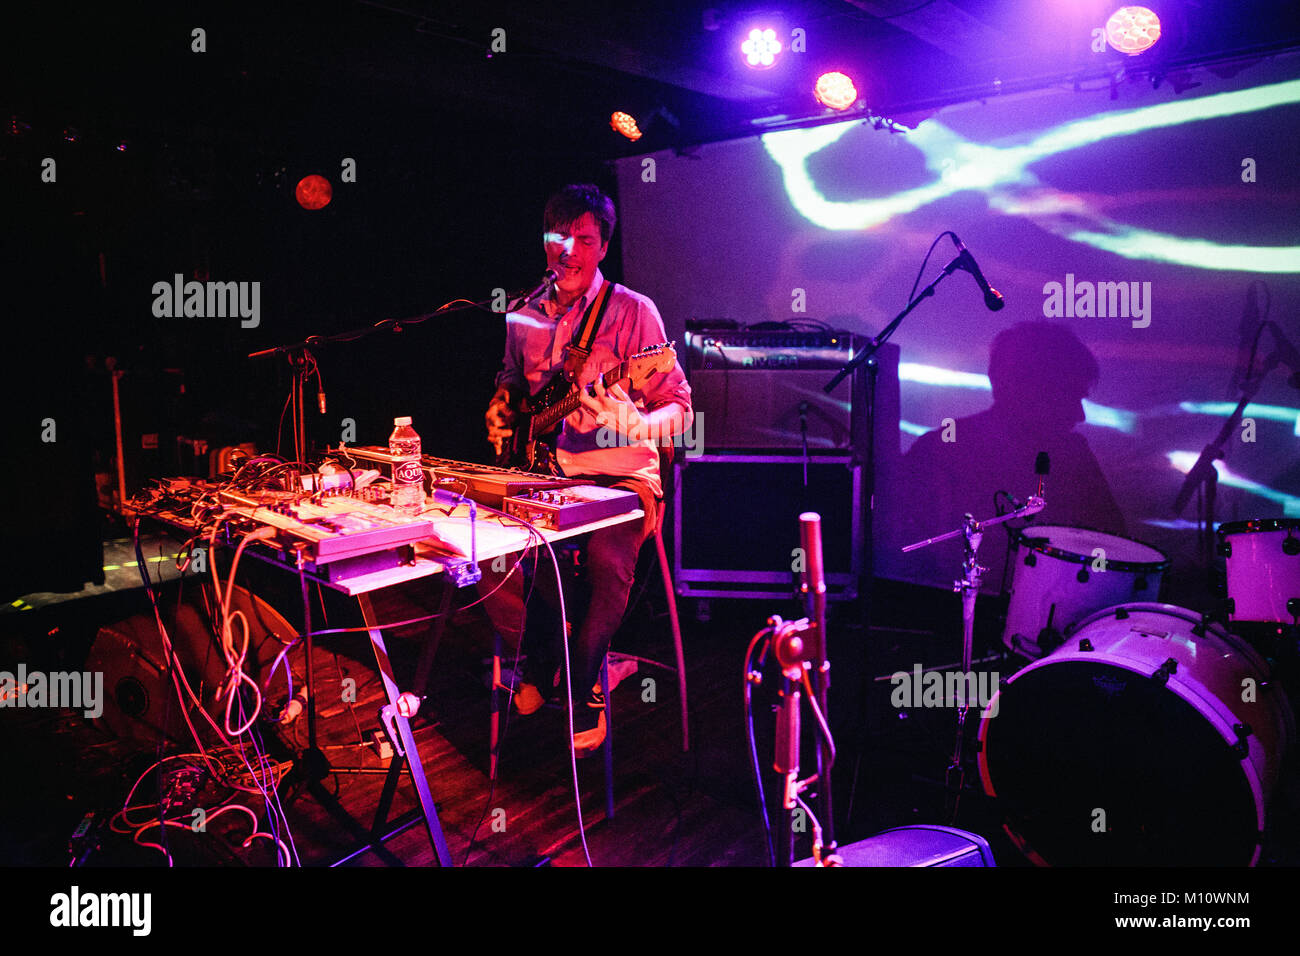 The British alternative rock band Spectrum a live concert Copenhagen Psych Fest 2016. Here vocalist, composer and musician Peter Kember is seen live on stage. Denmark, 2016 Stock Photo - Alamy